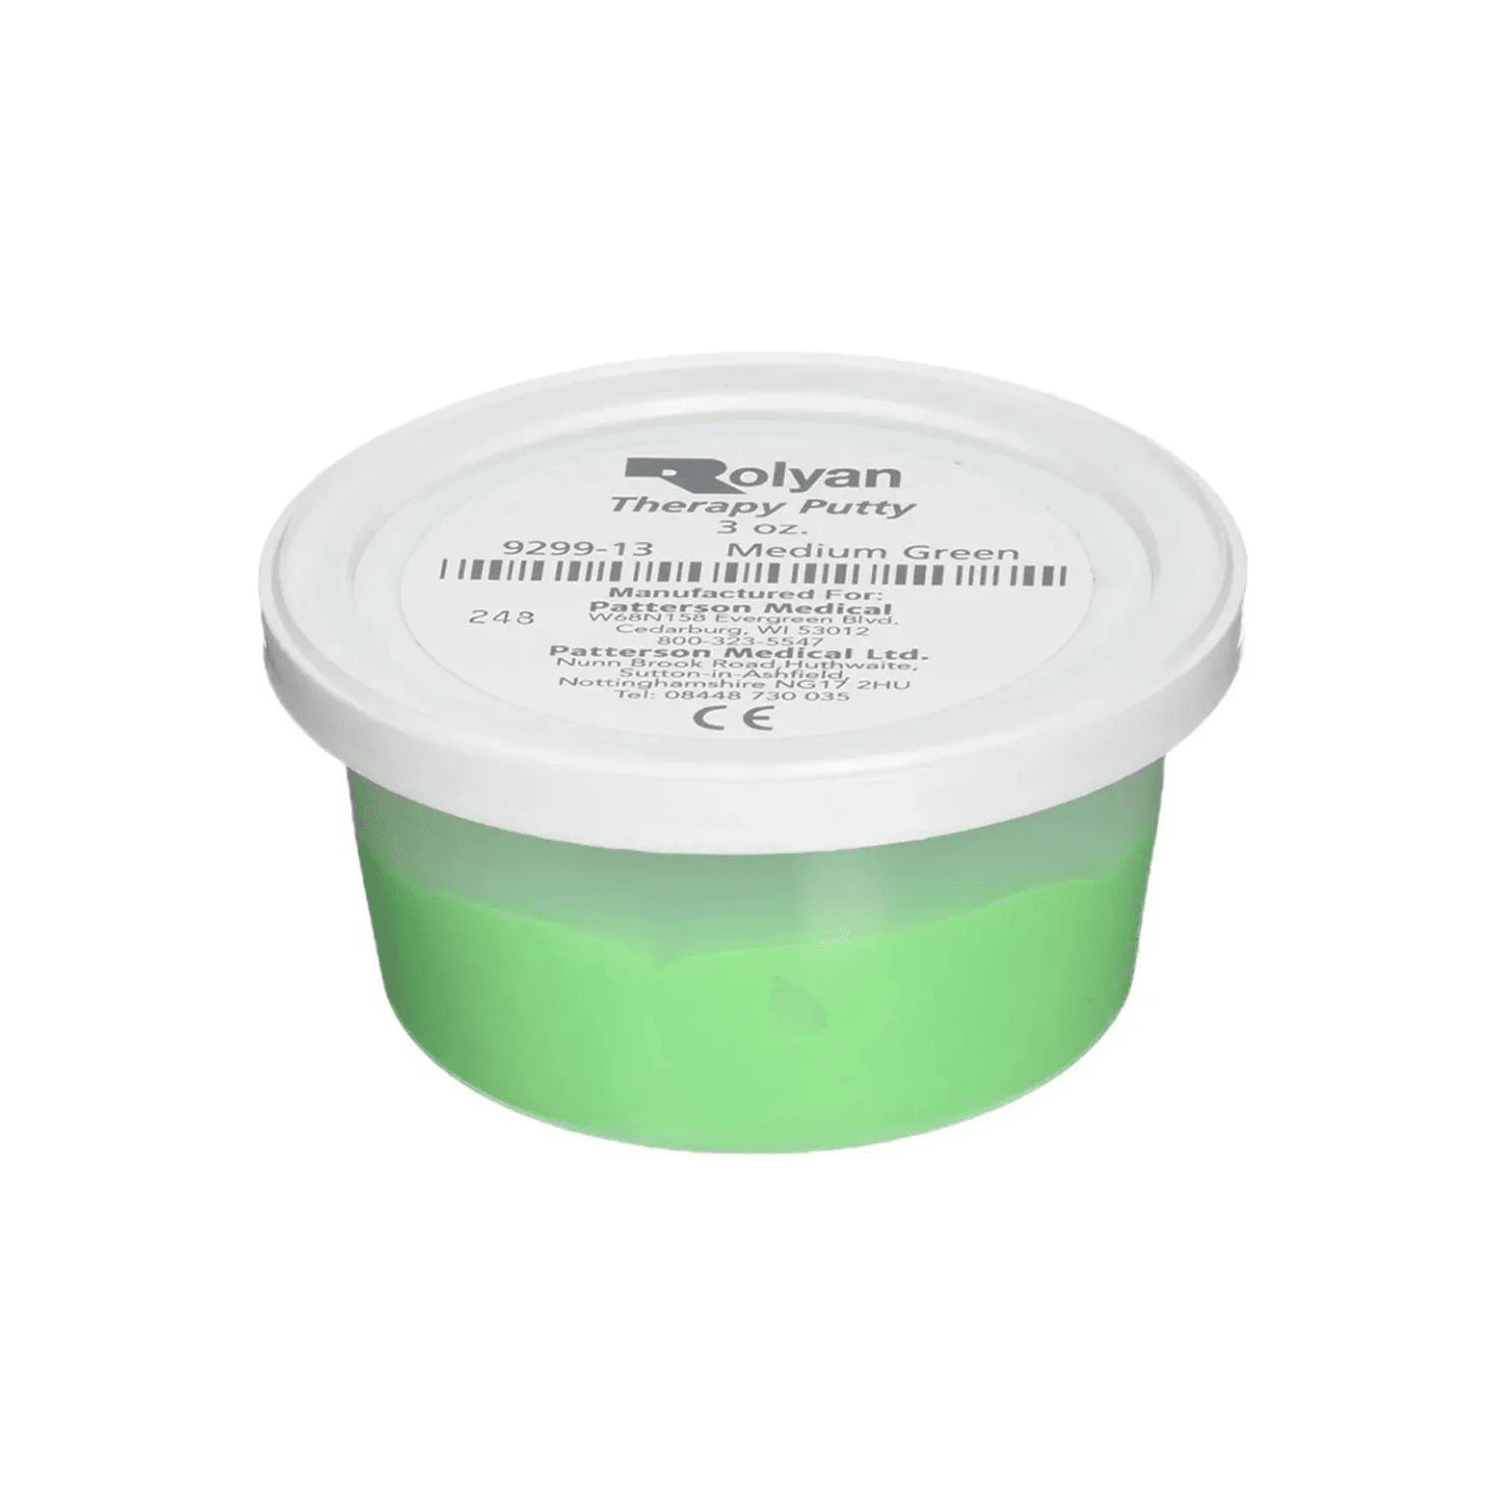 Rolyan Therapeutic Exercise Putty_Green Medium_